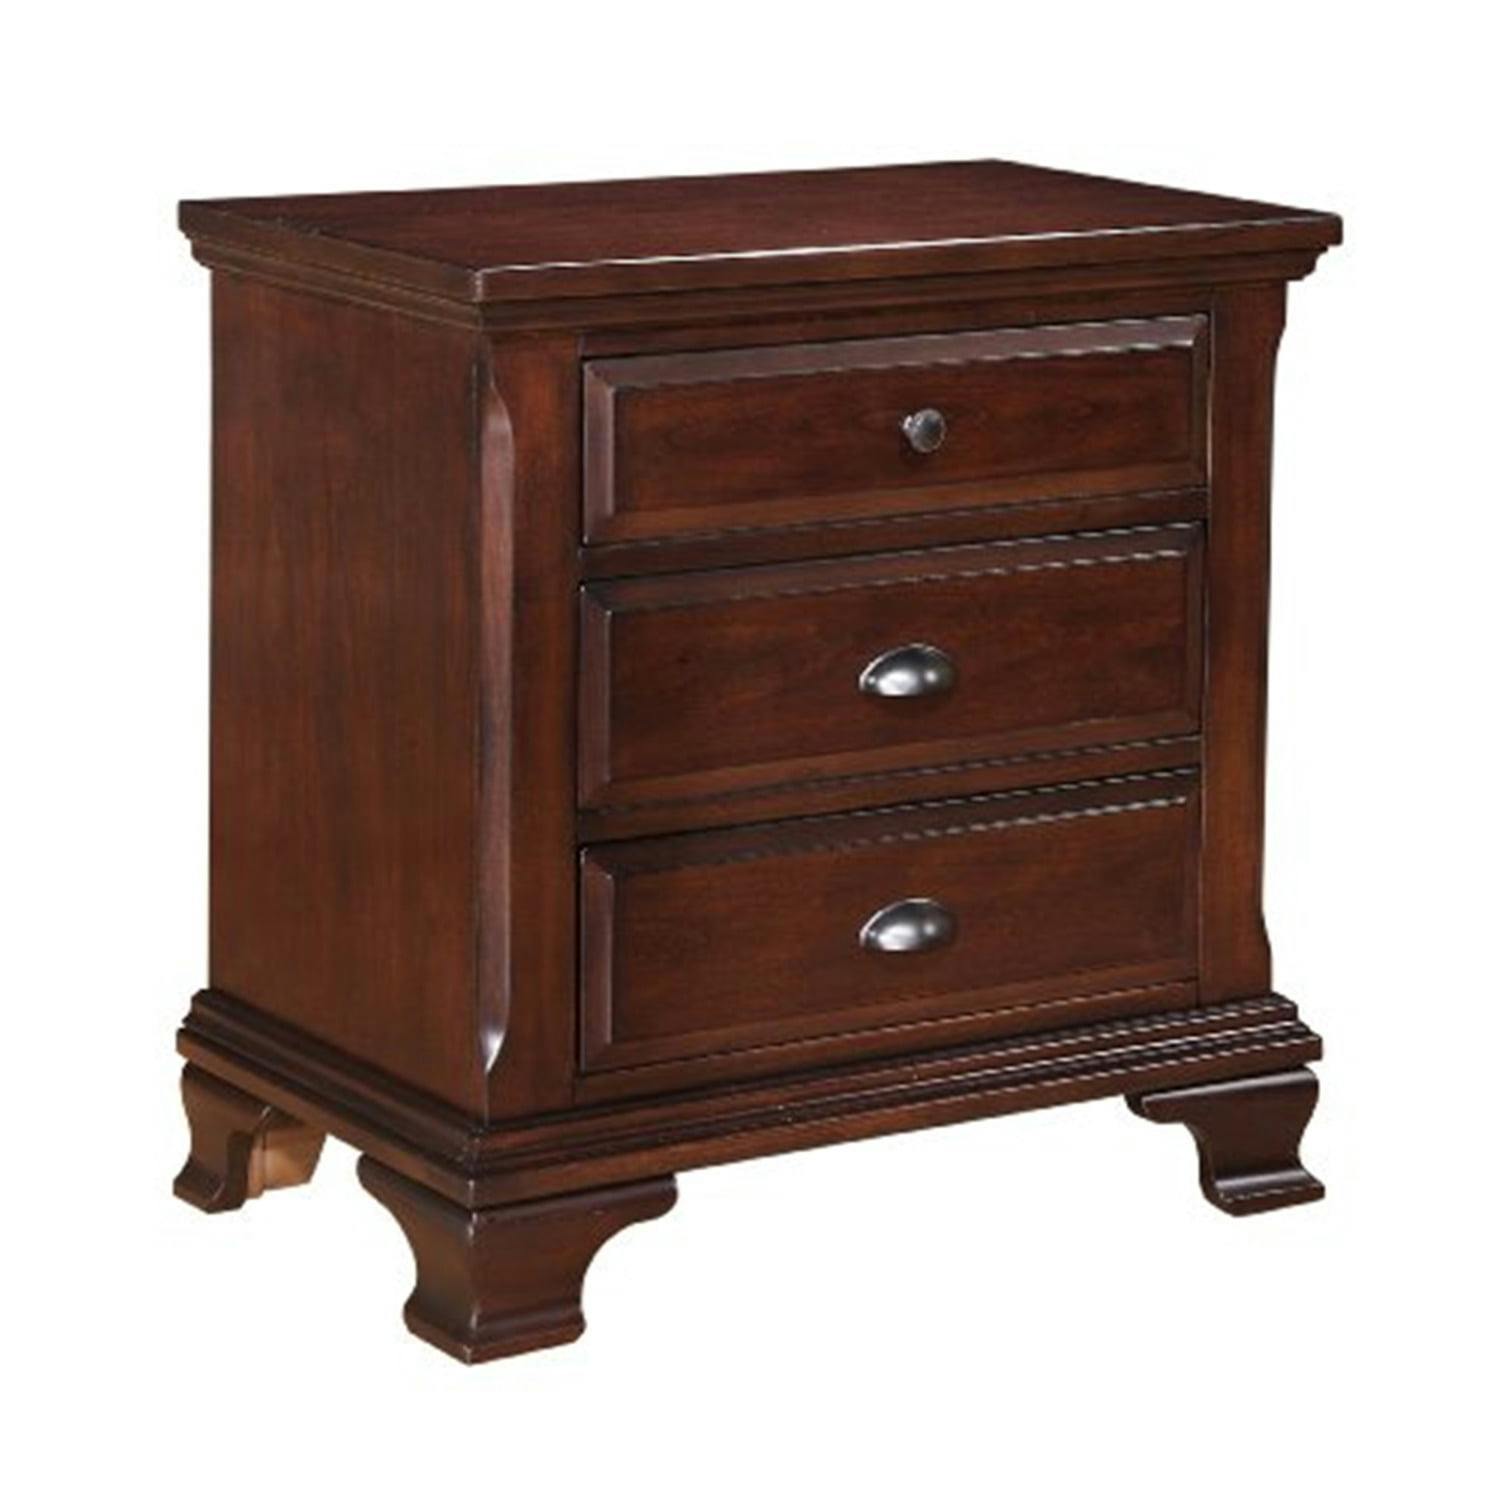 Transitional Deep Cherry 3-Drawer Nightstand with Pewter Knobs